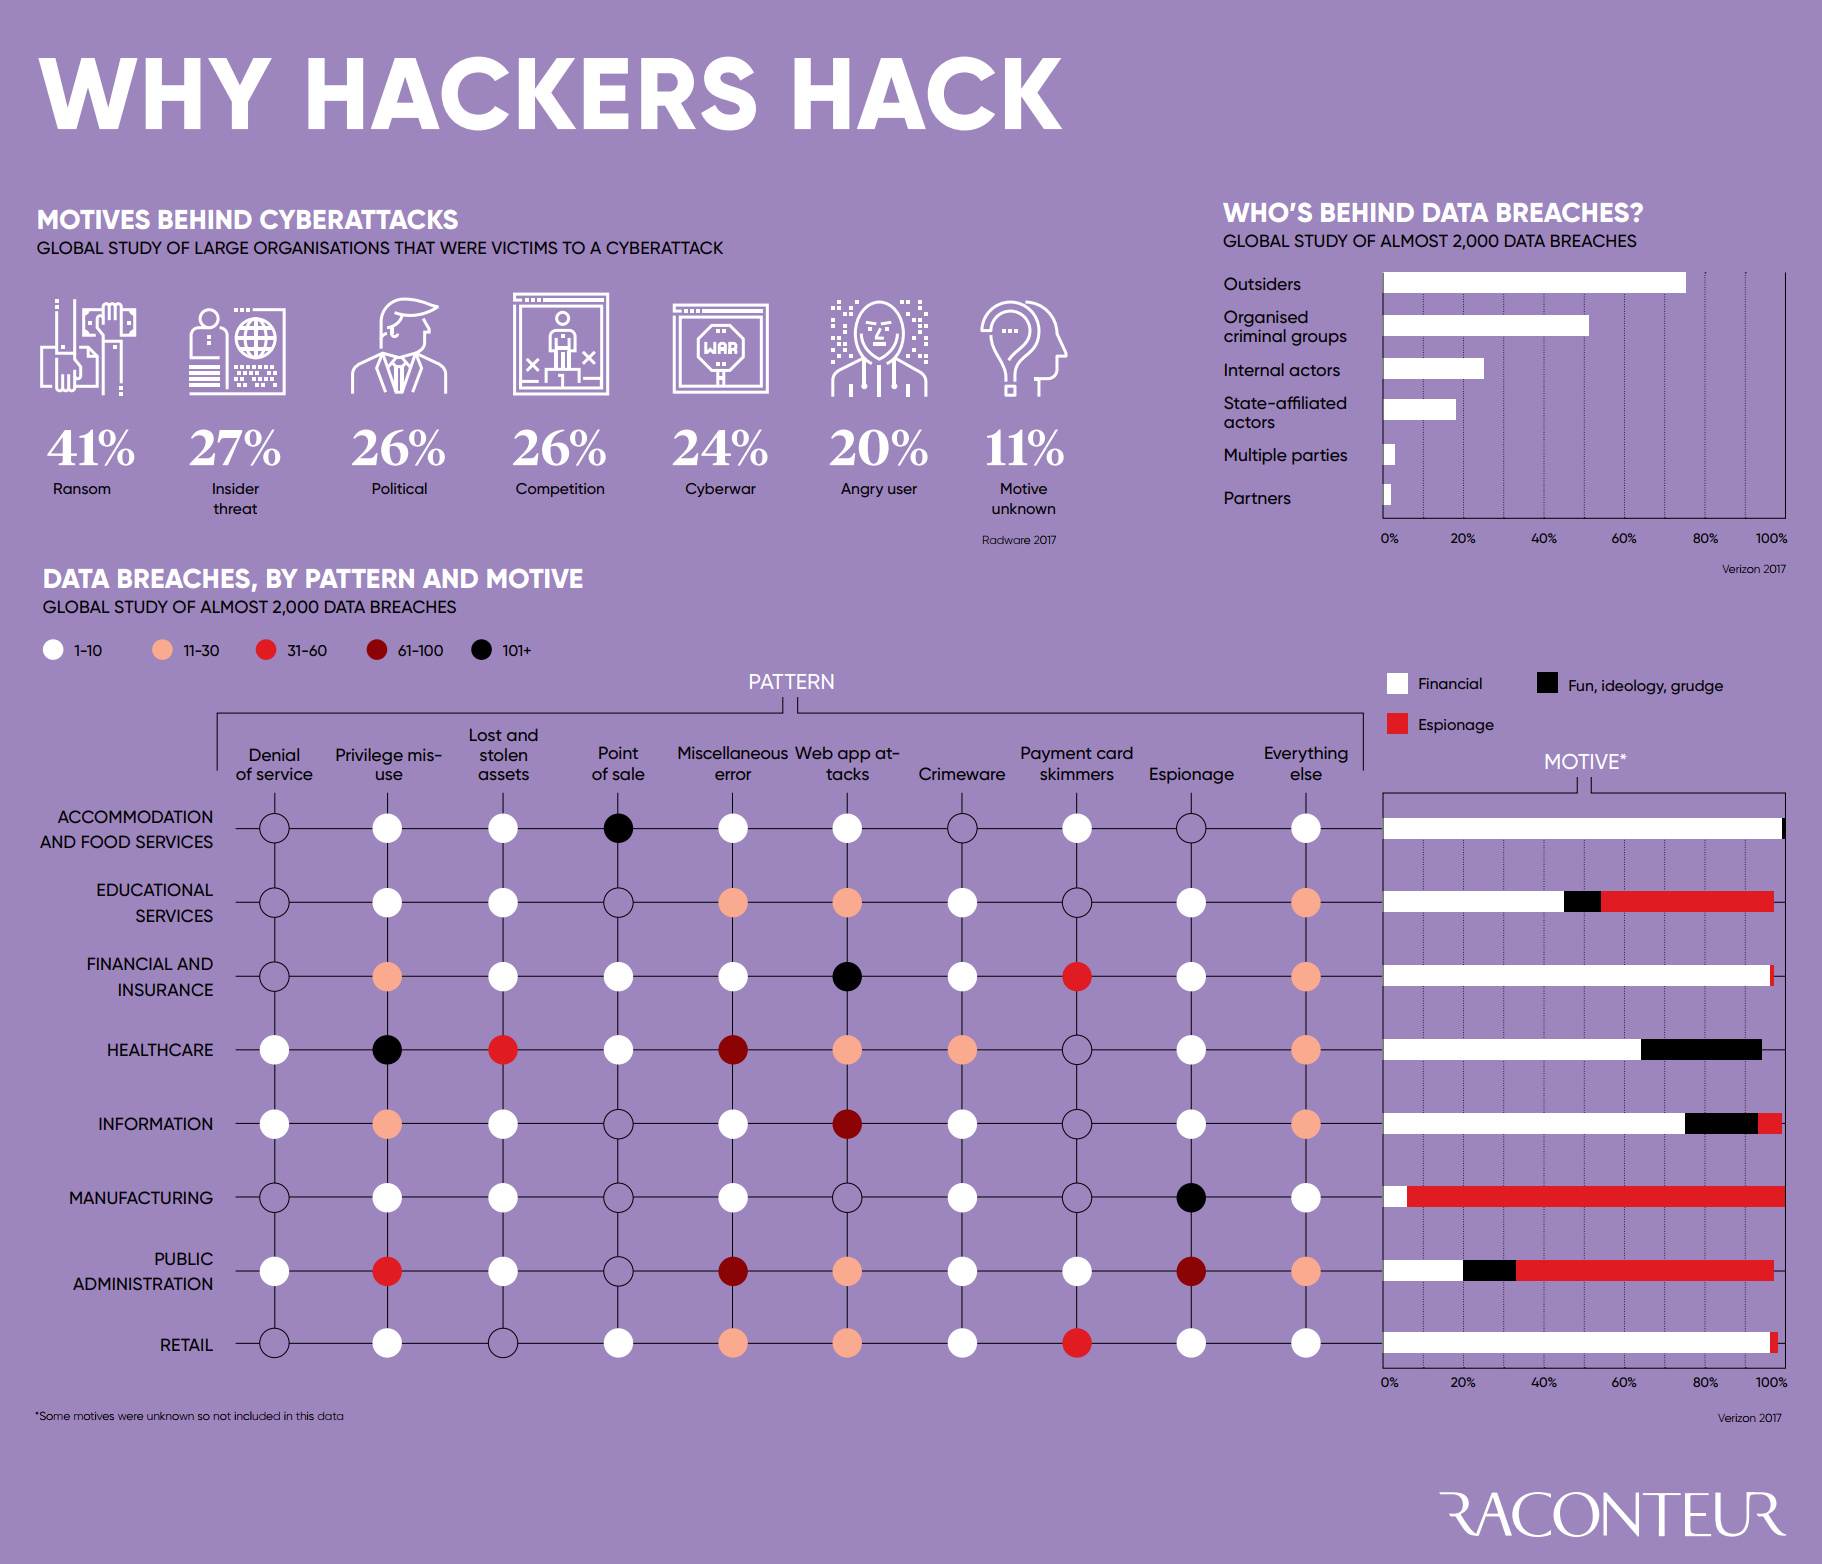 Why Hackers Hack: The Motives Behind Cyberattacks